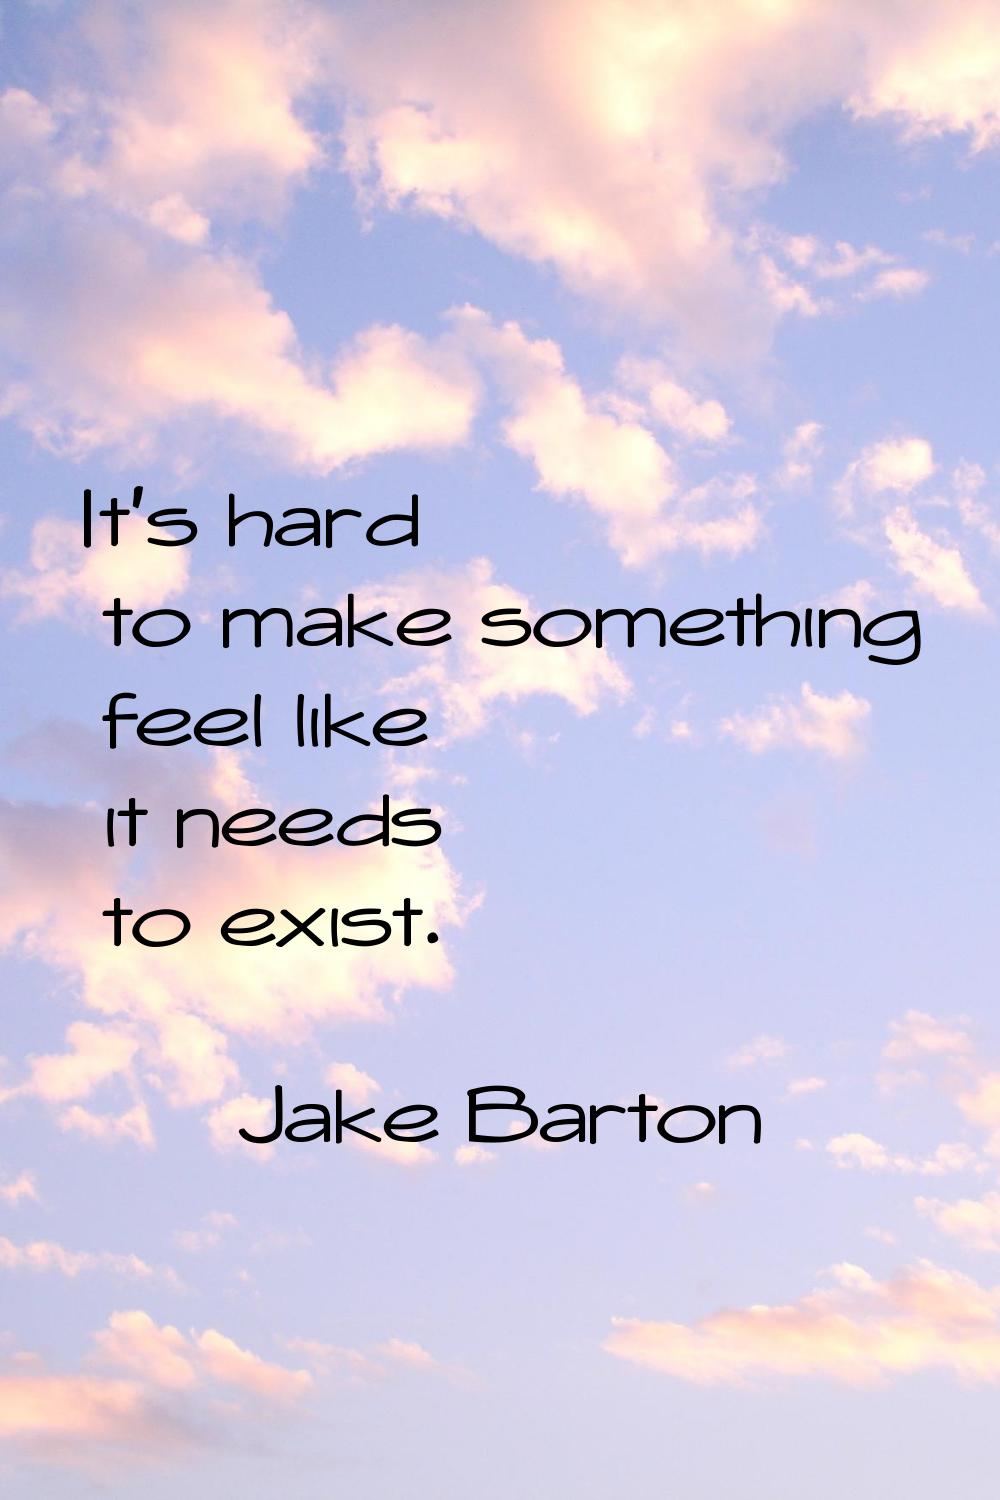 It's hard to make something feel like it needs to exist.